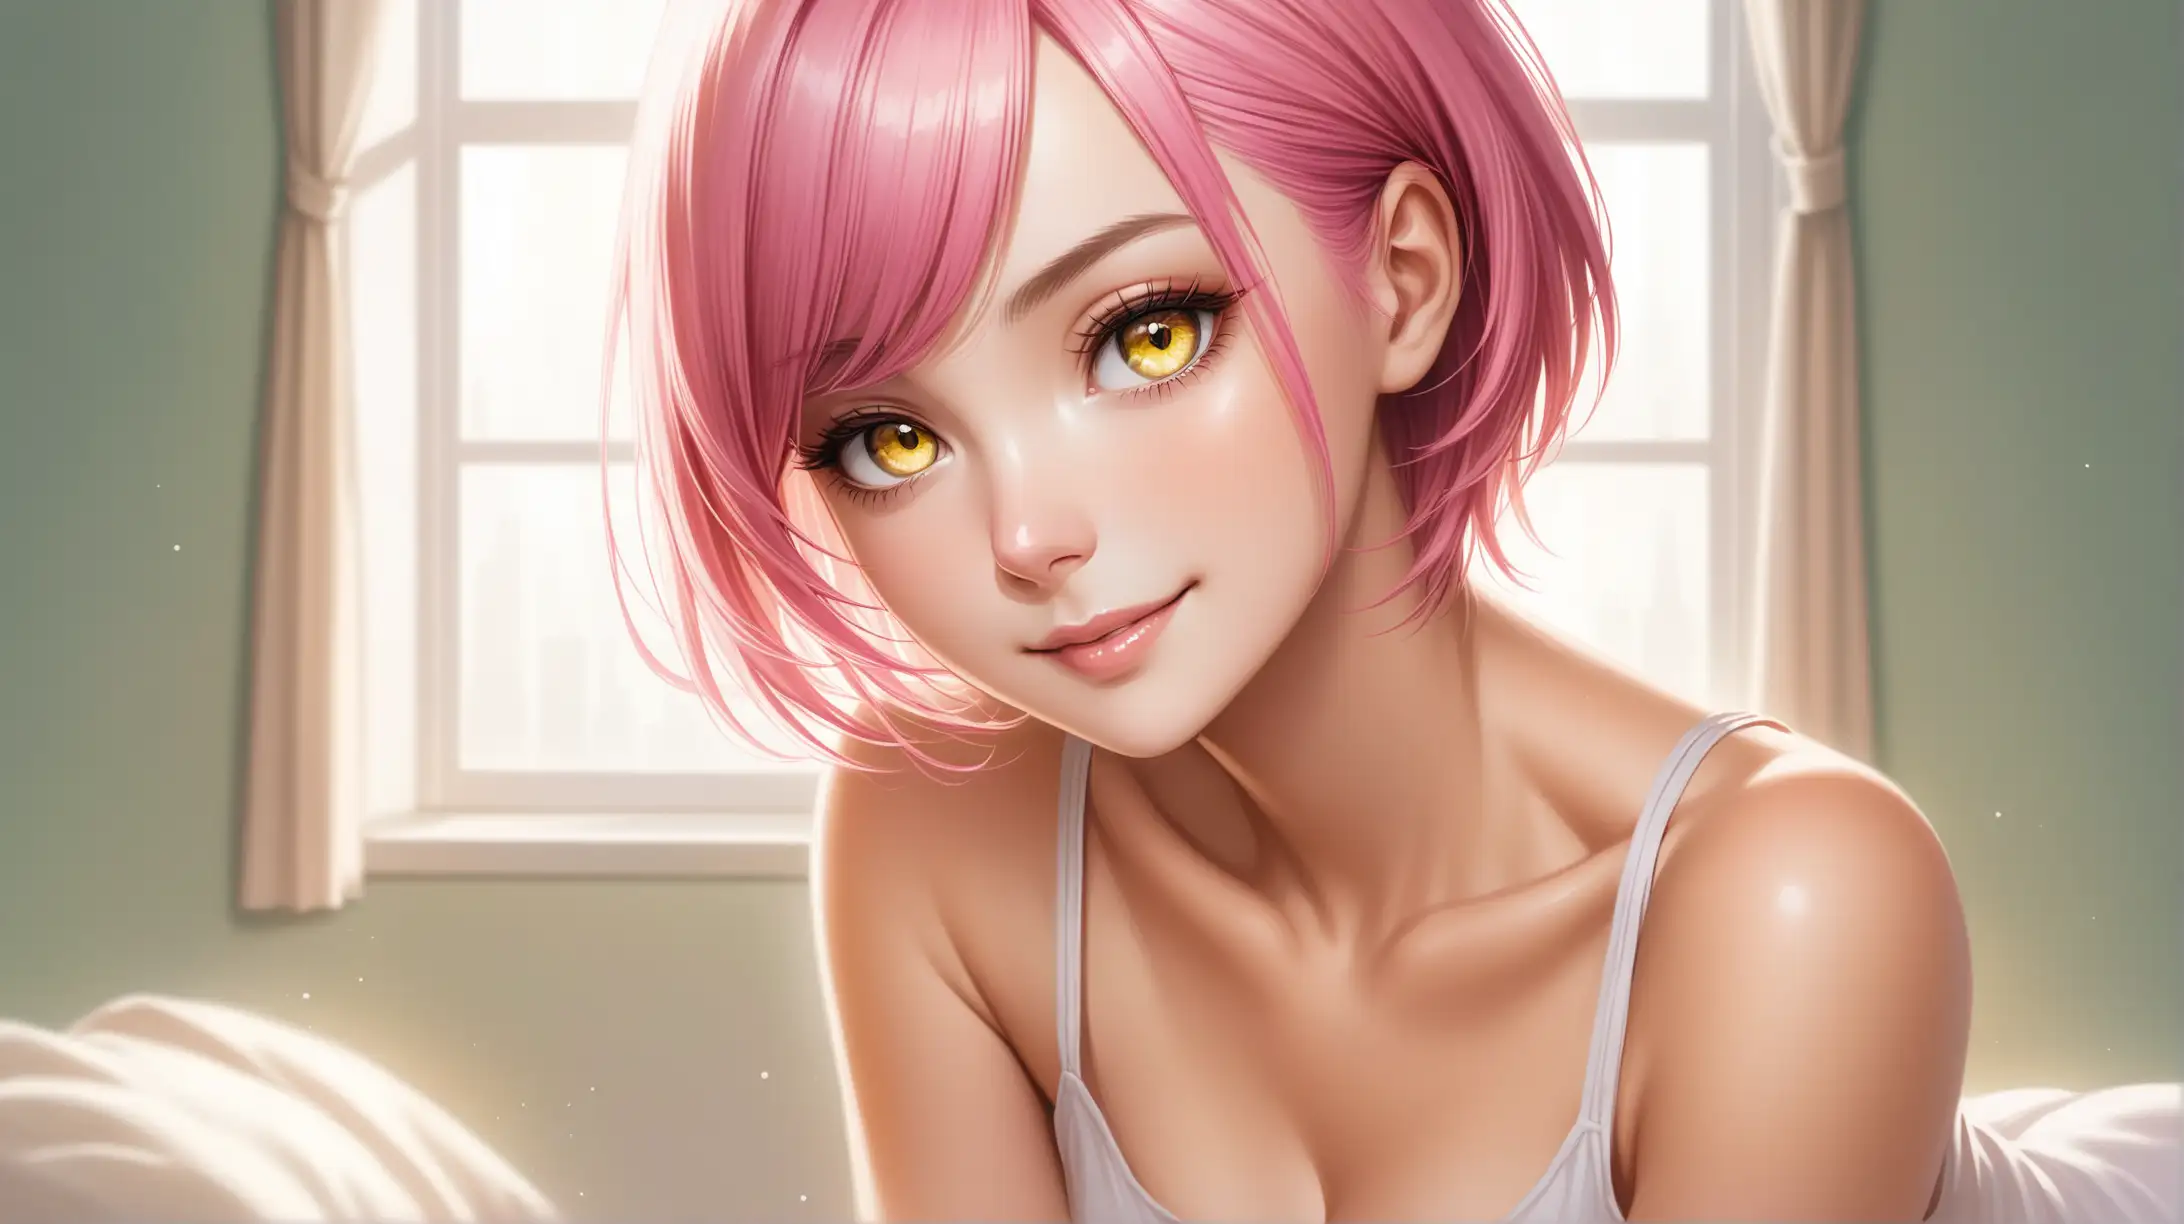 Seductive Woman with Short Pink Hair and Yellow Eyes in Casual Outfit